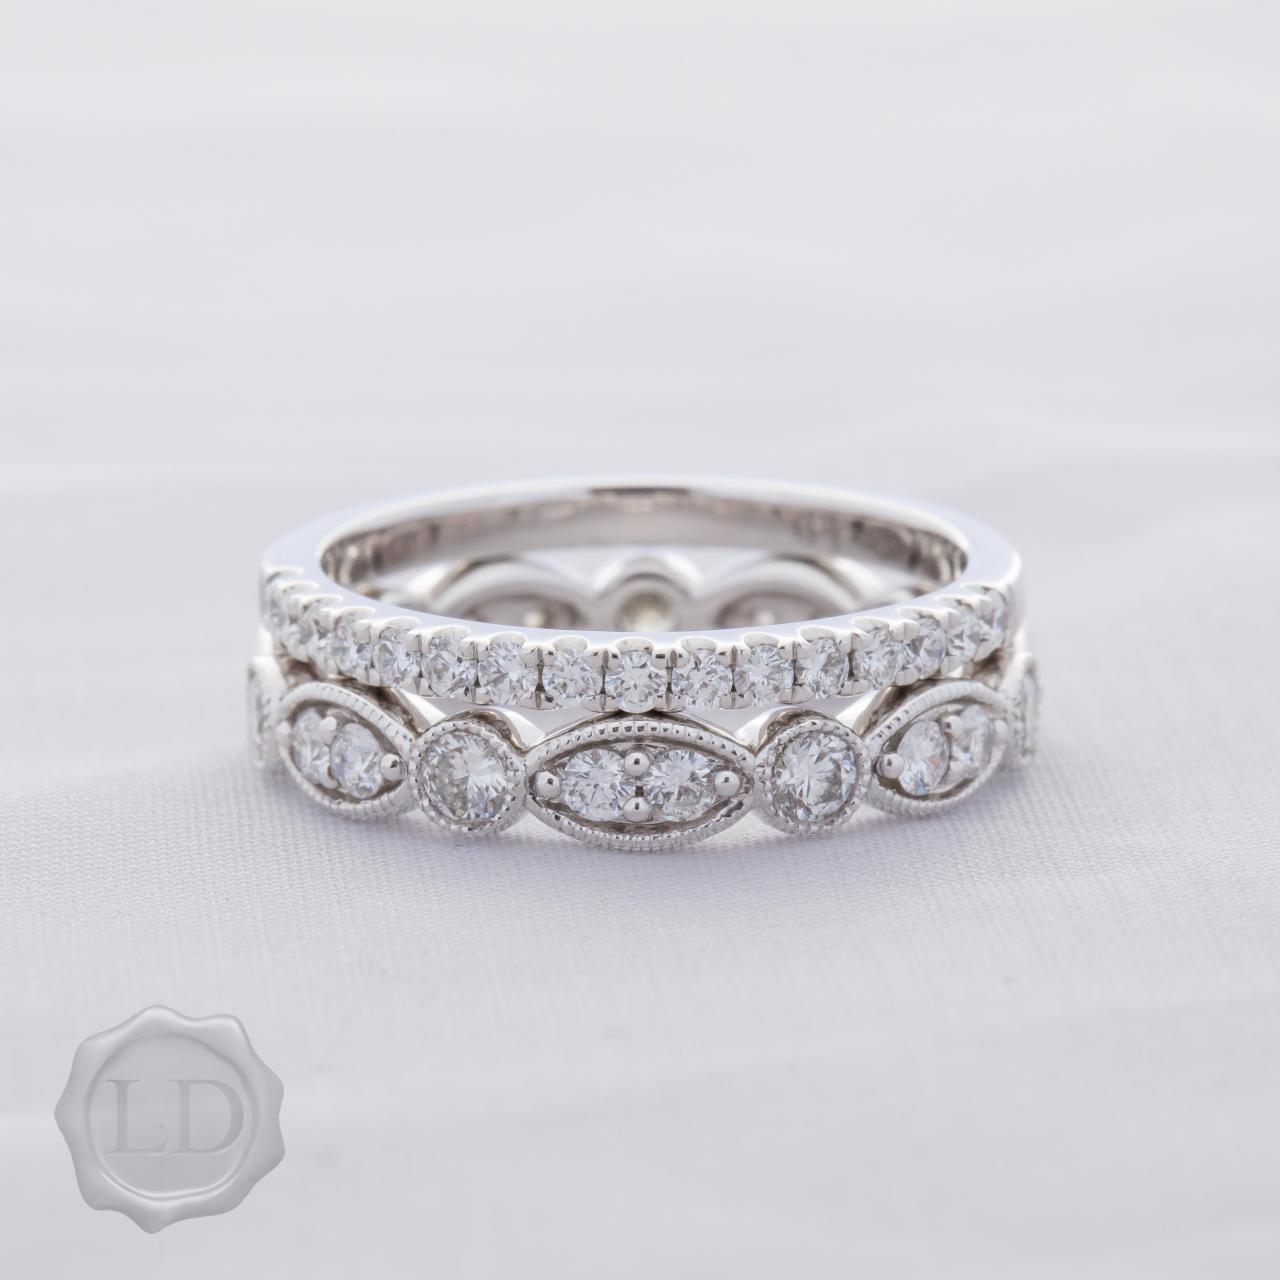 Lovely LD diamond wedding band in 18ct white gold, size M